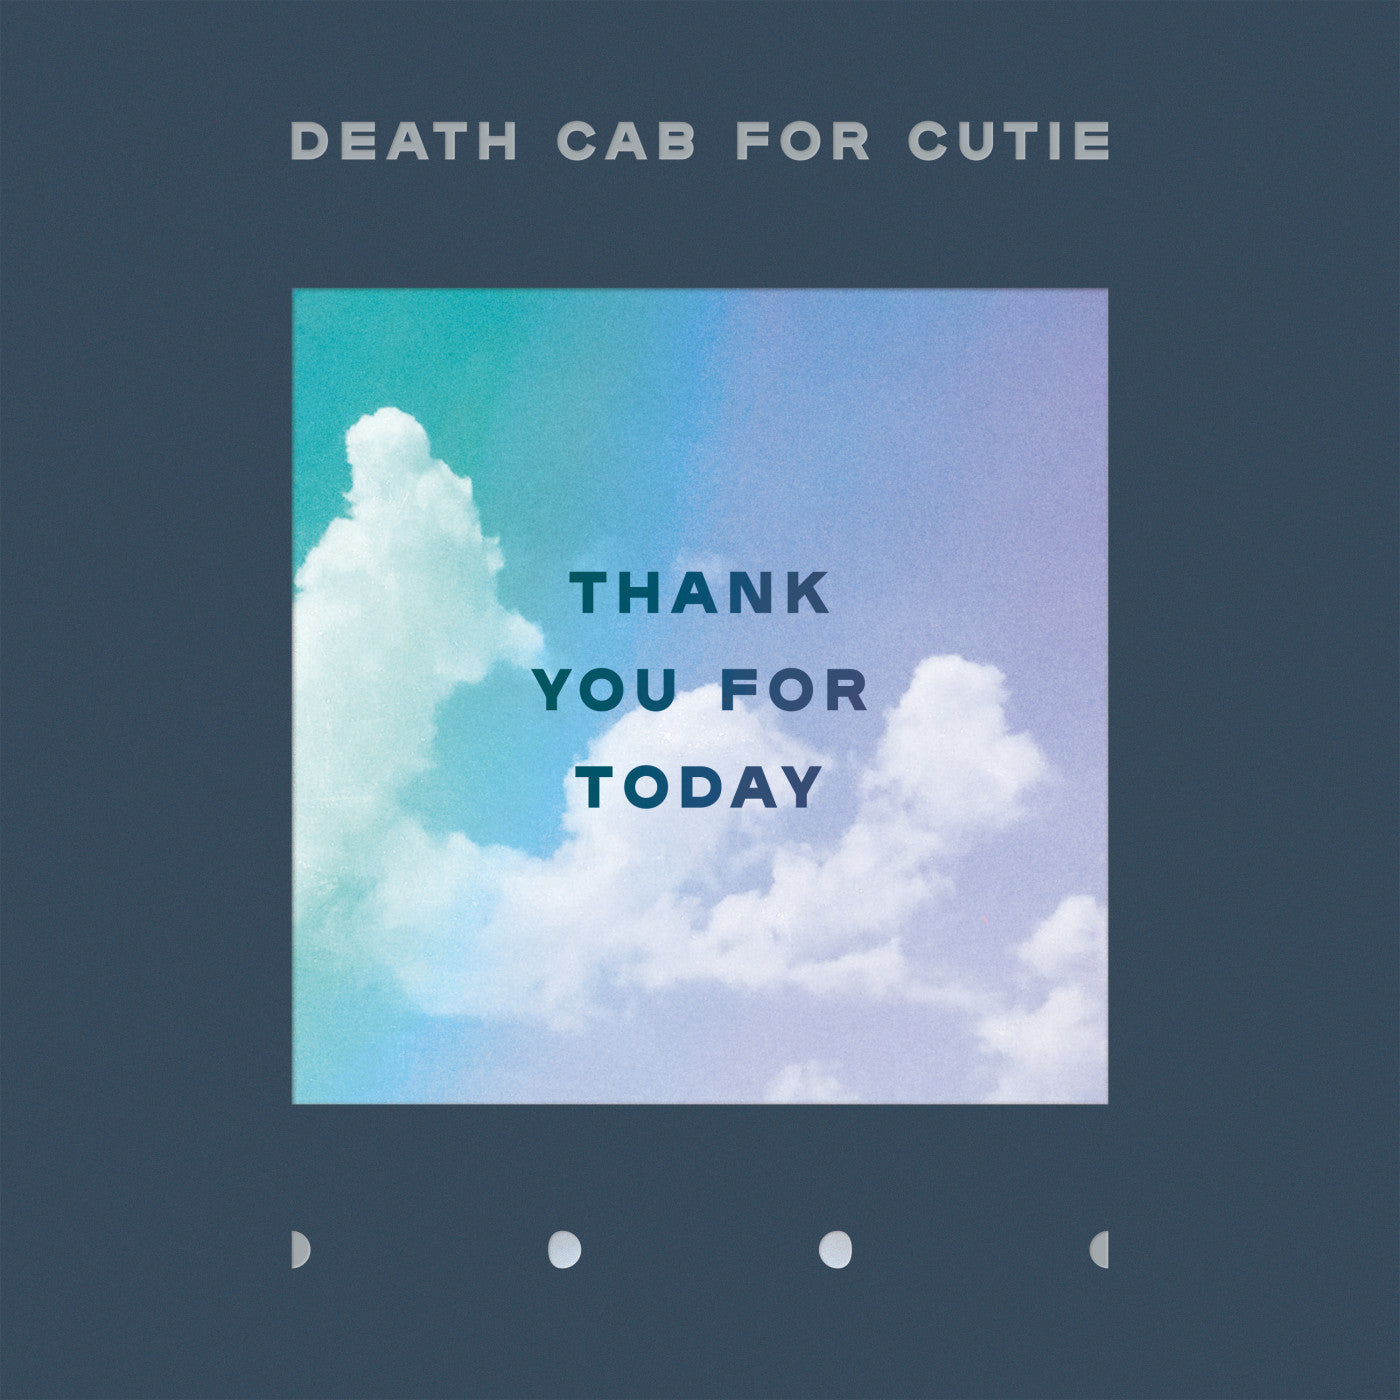 DEATH CAB FOR CUTIE - THANK YOU FOR TODAY Vinyl LP